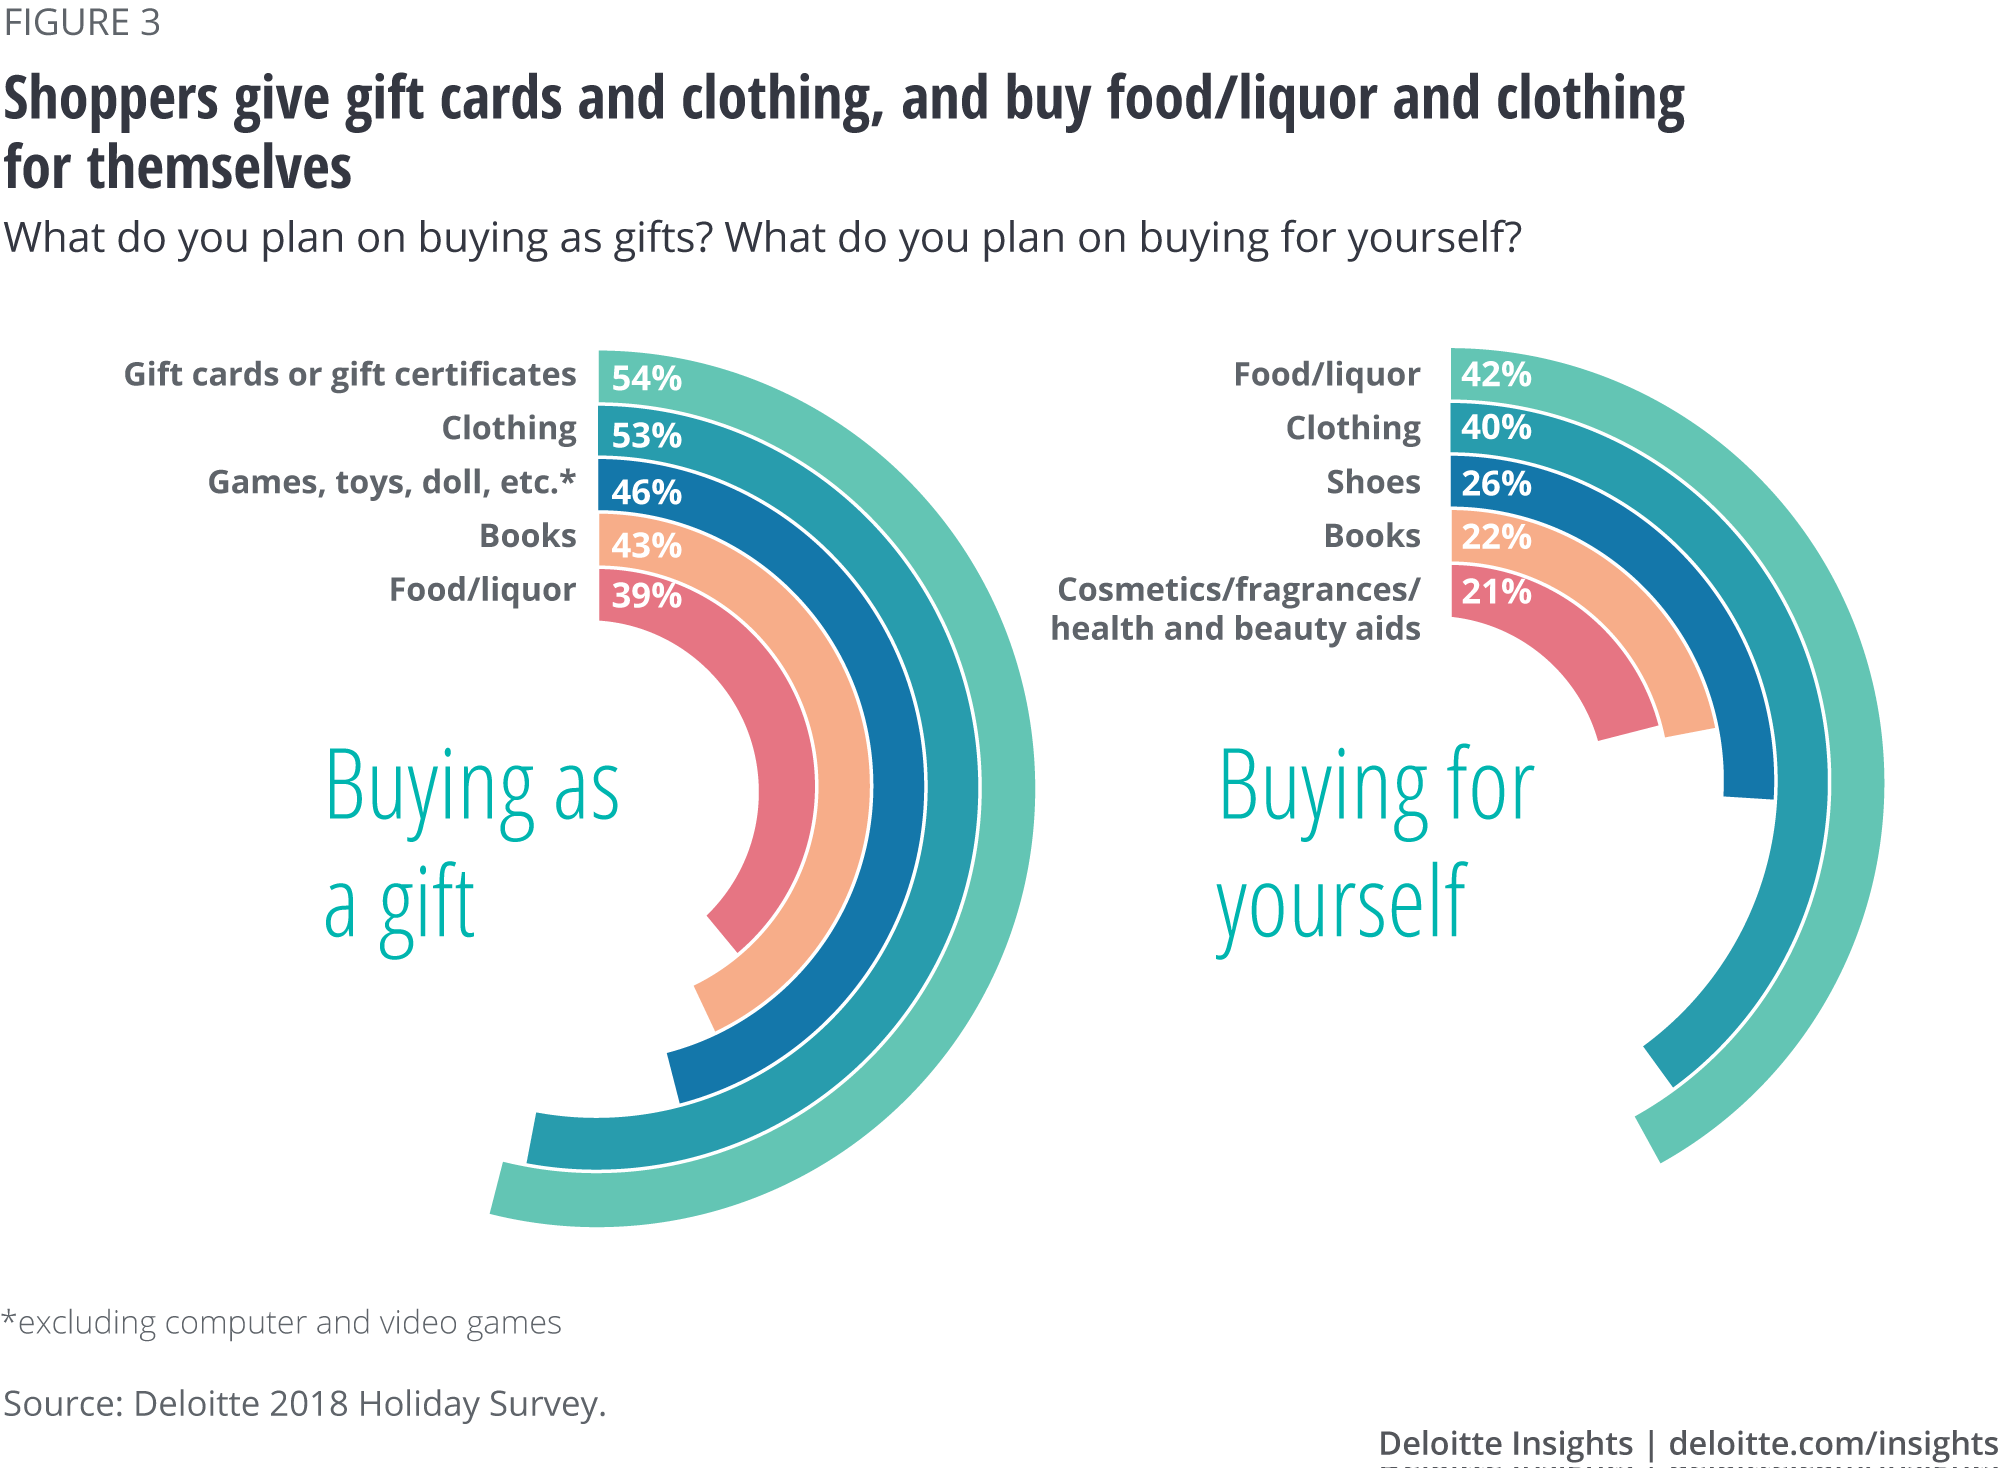 Shoppers give gift cards and clothing, and buy food/ liquor and clothing for themselves